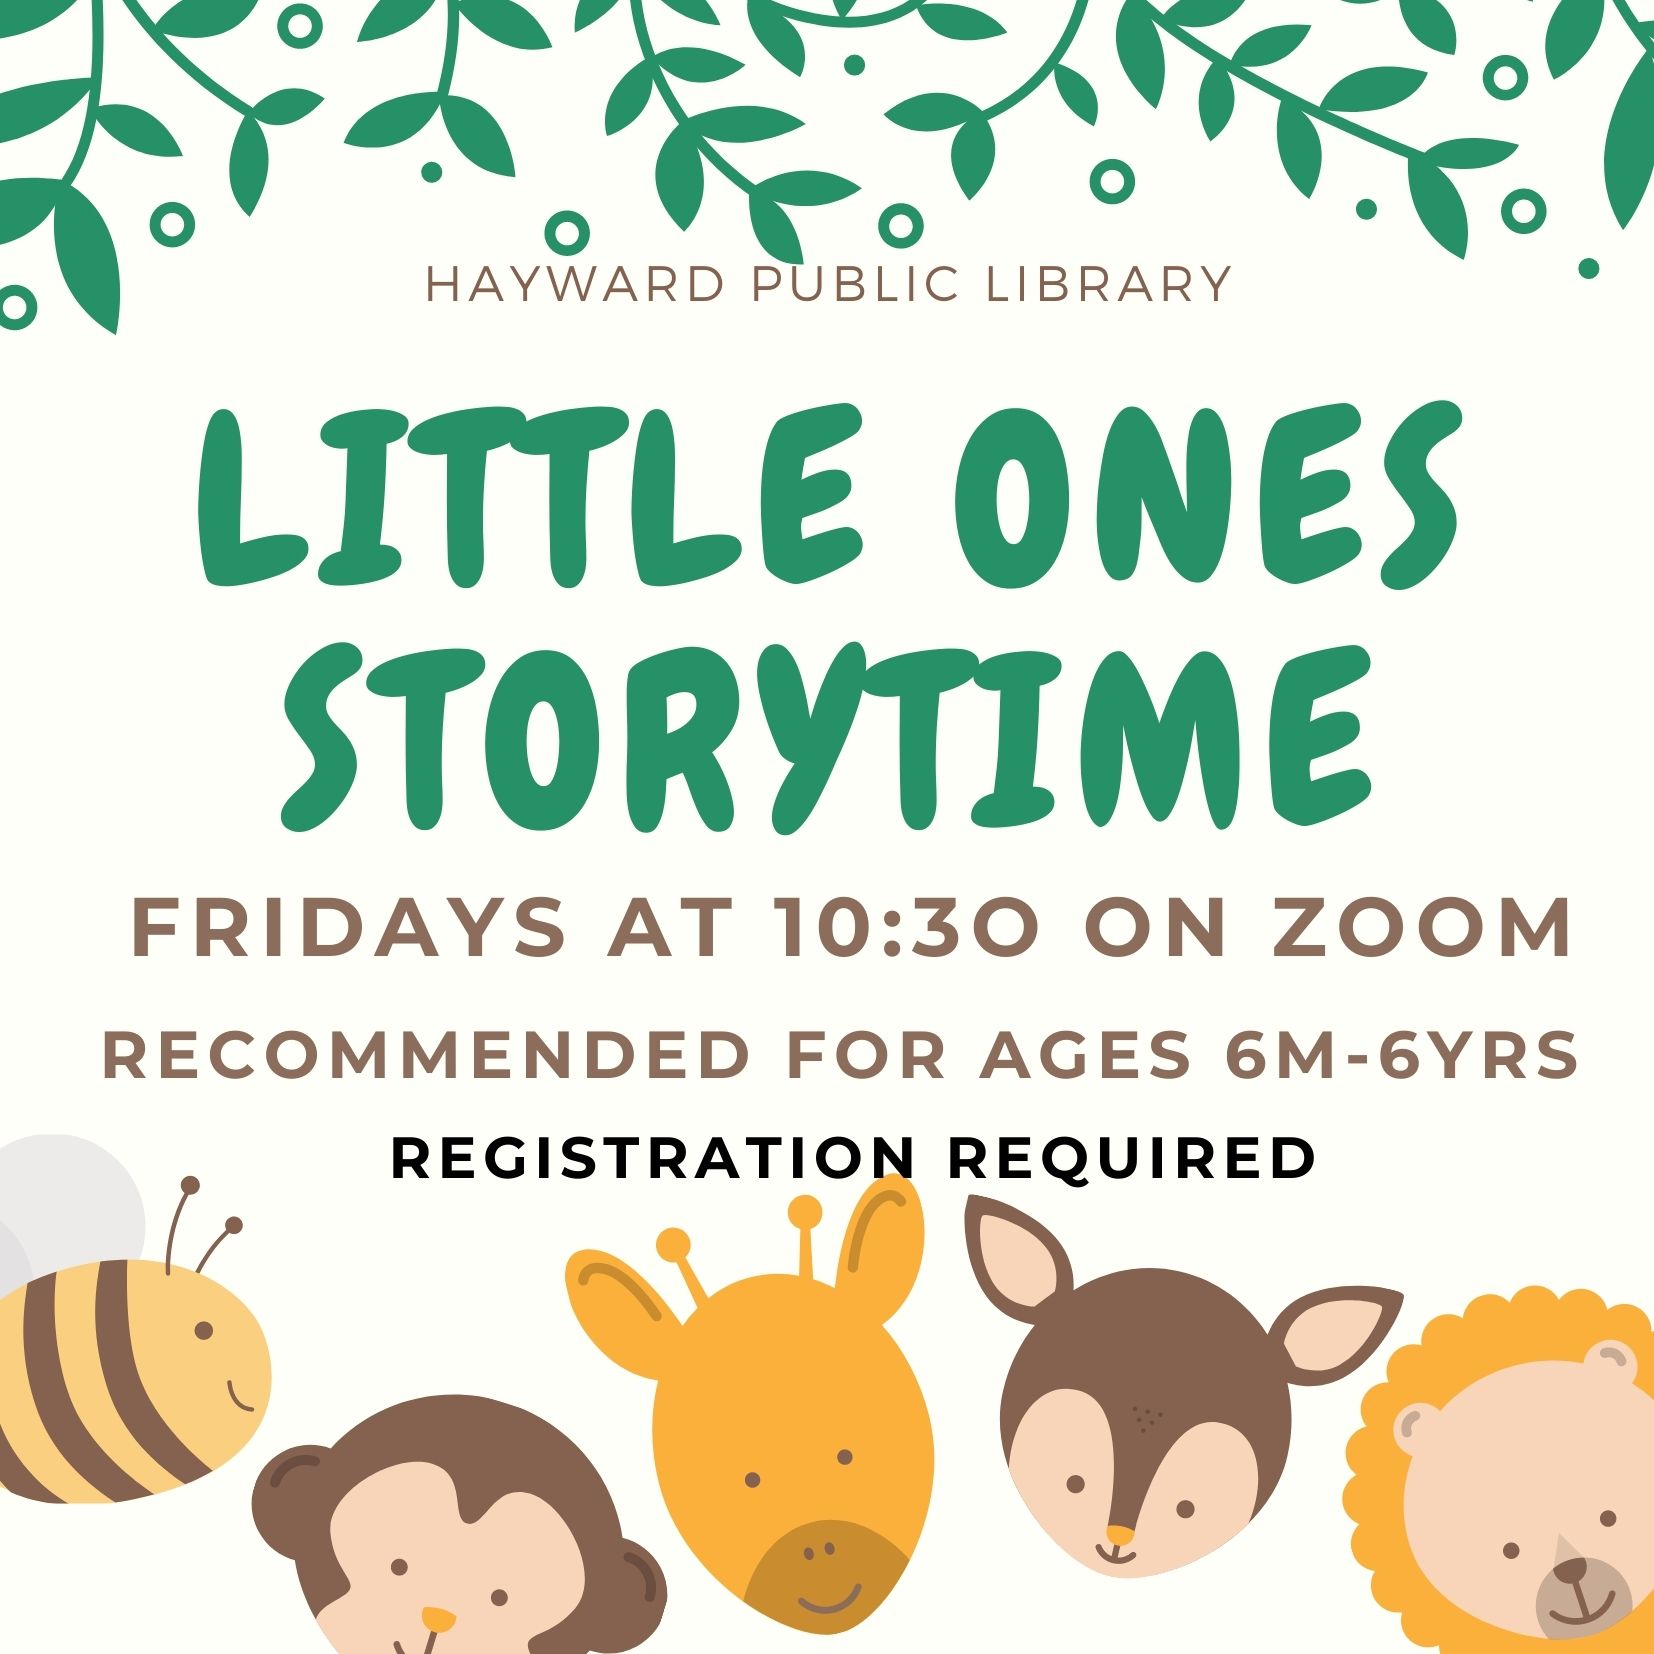 Flyer with leaves and animals, Text reads: Little Ones Storytime, Fridays at 10:30 on Zoom, recommended for ages 6m-6yrs,  registration required